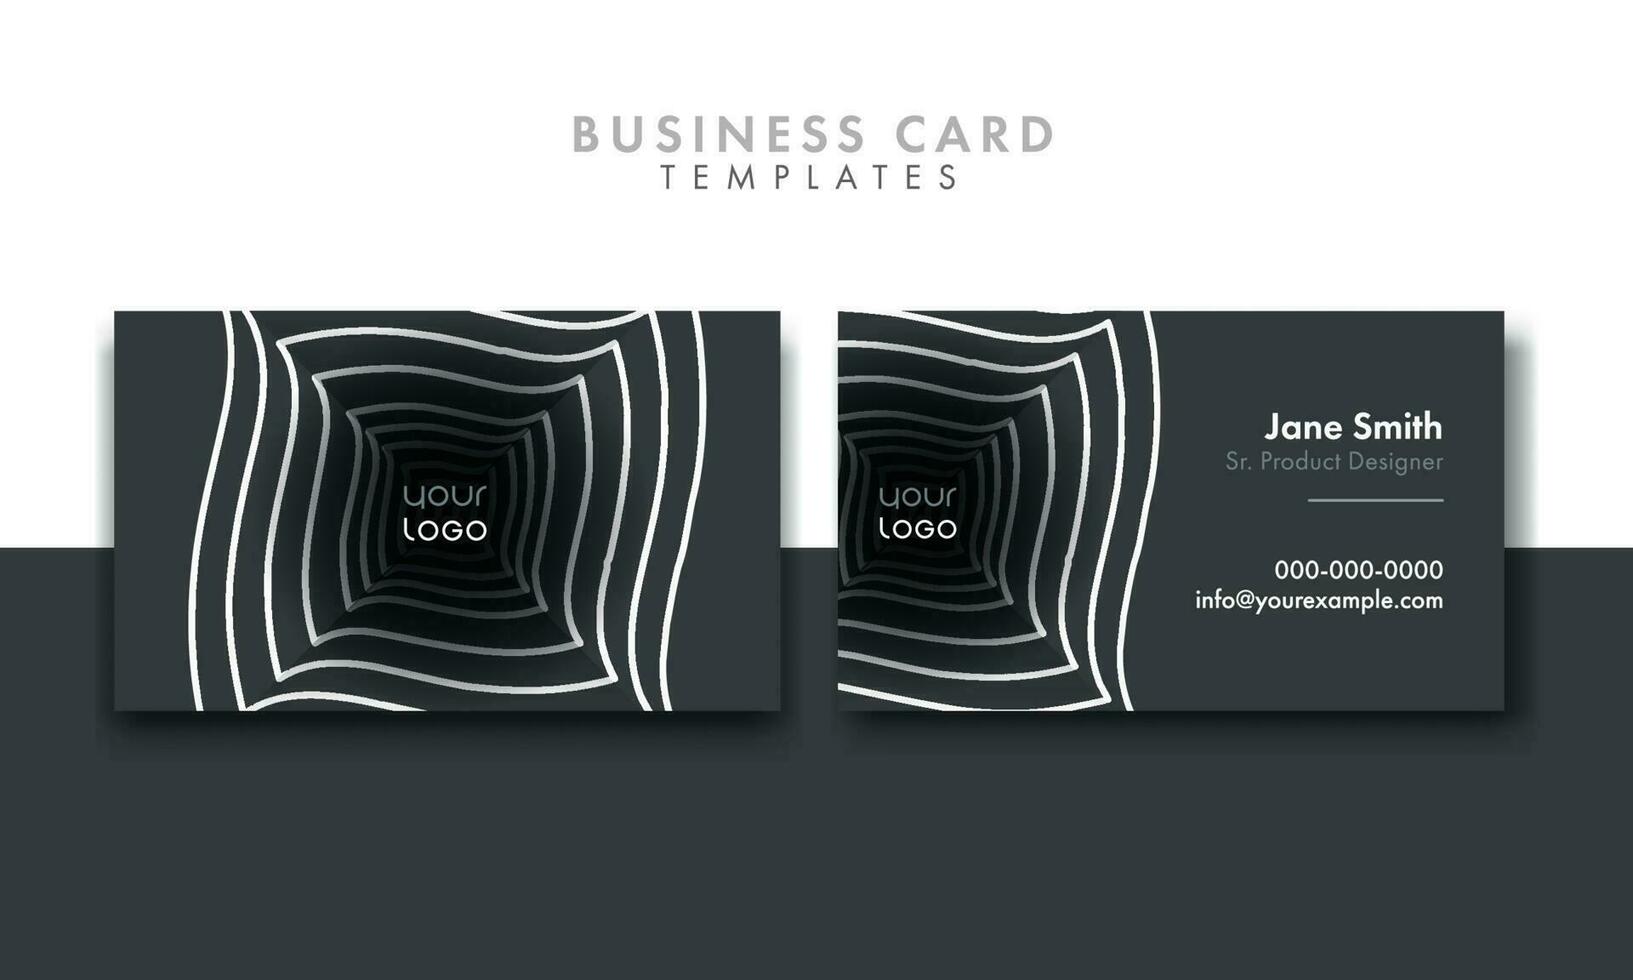 Modern Editable Business Card Templates On Dark Gray And White Background For Advertising. vector